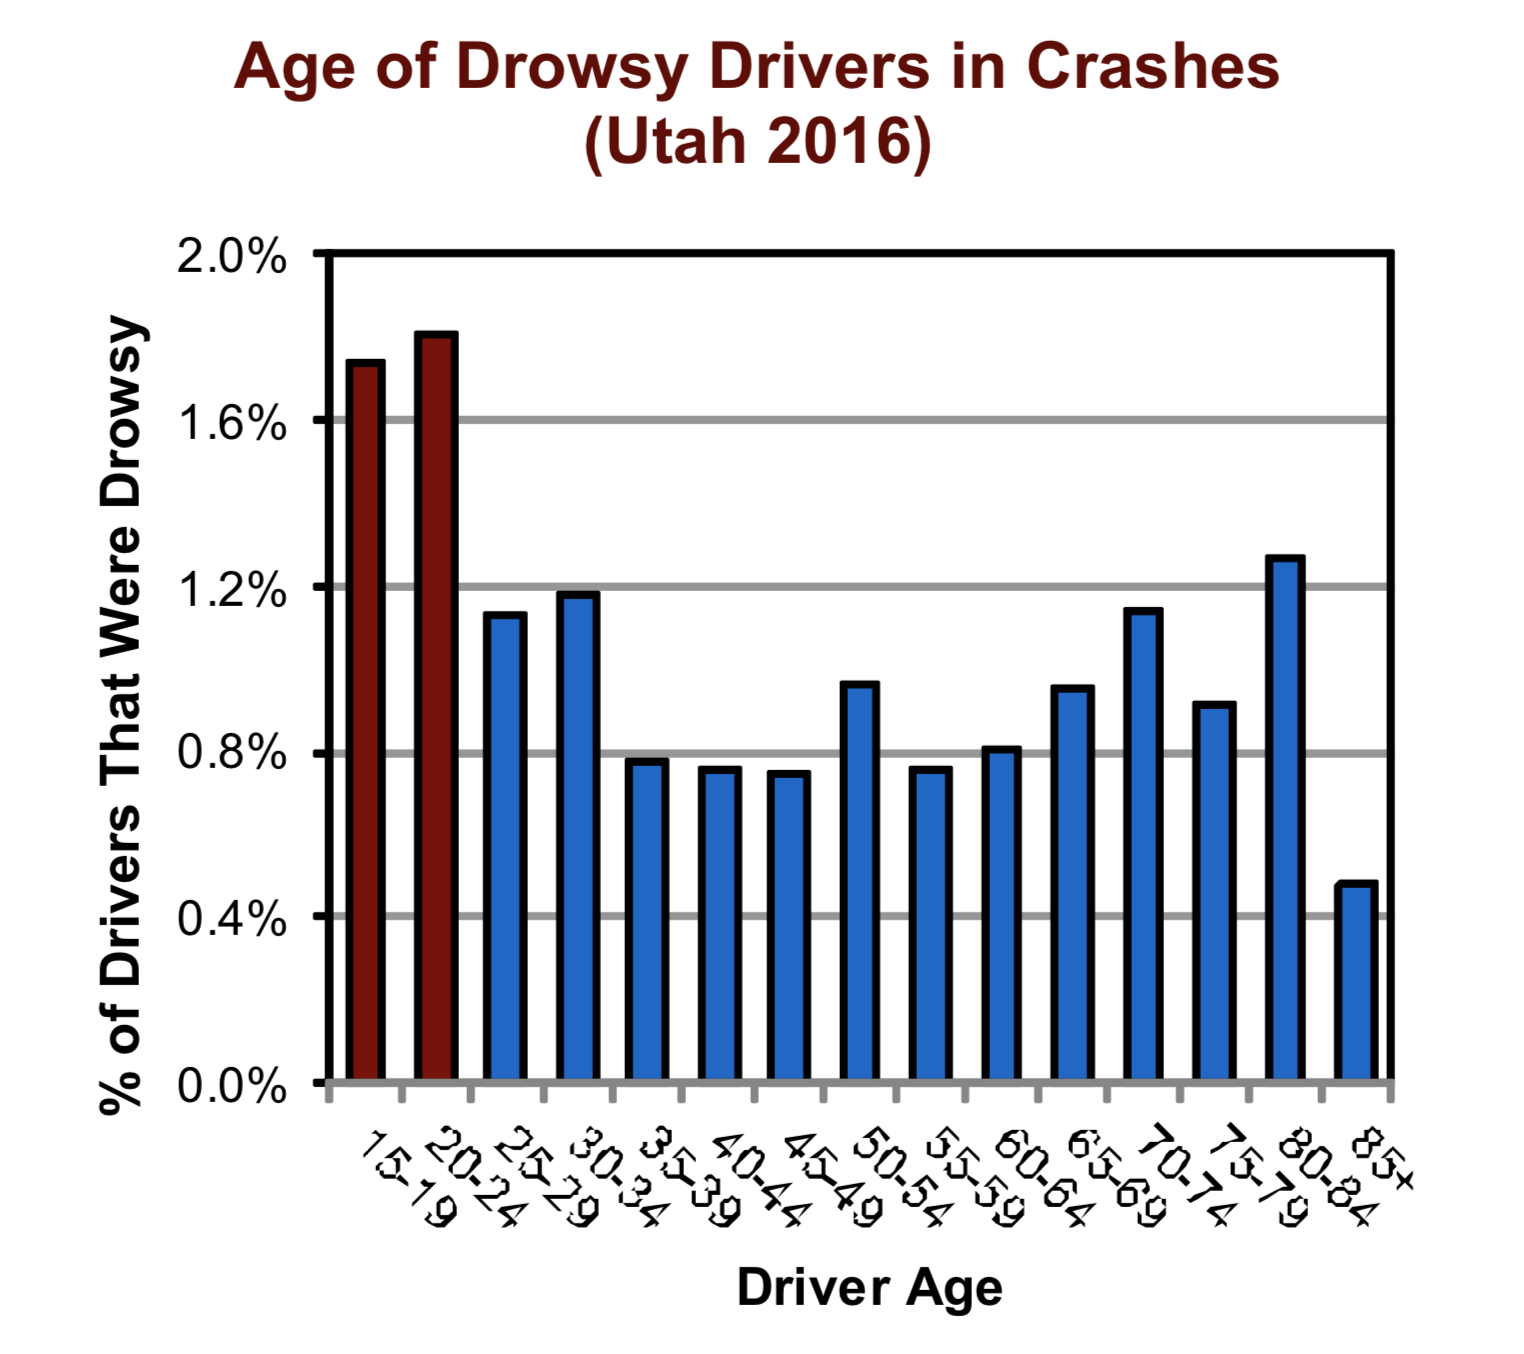 Bar graph shows the age of drowsy drivers in crashes in Utah in 2016. Drivers 15-24 were most at risk.